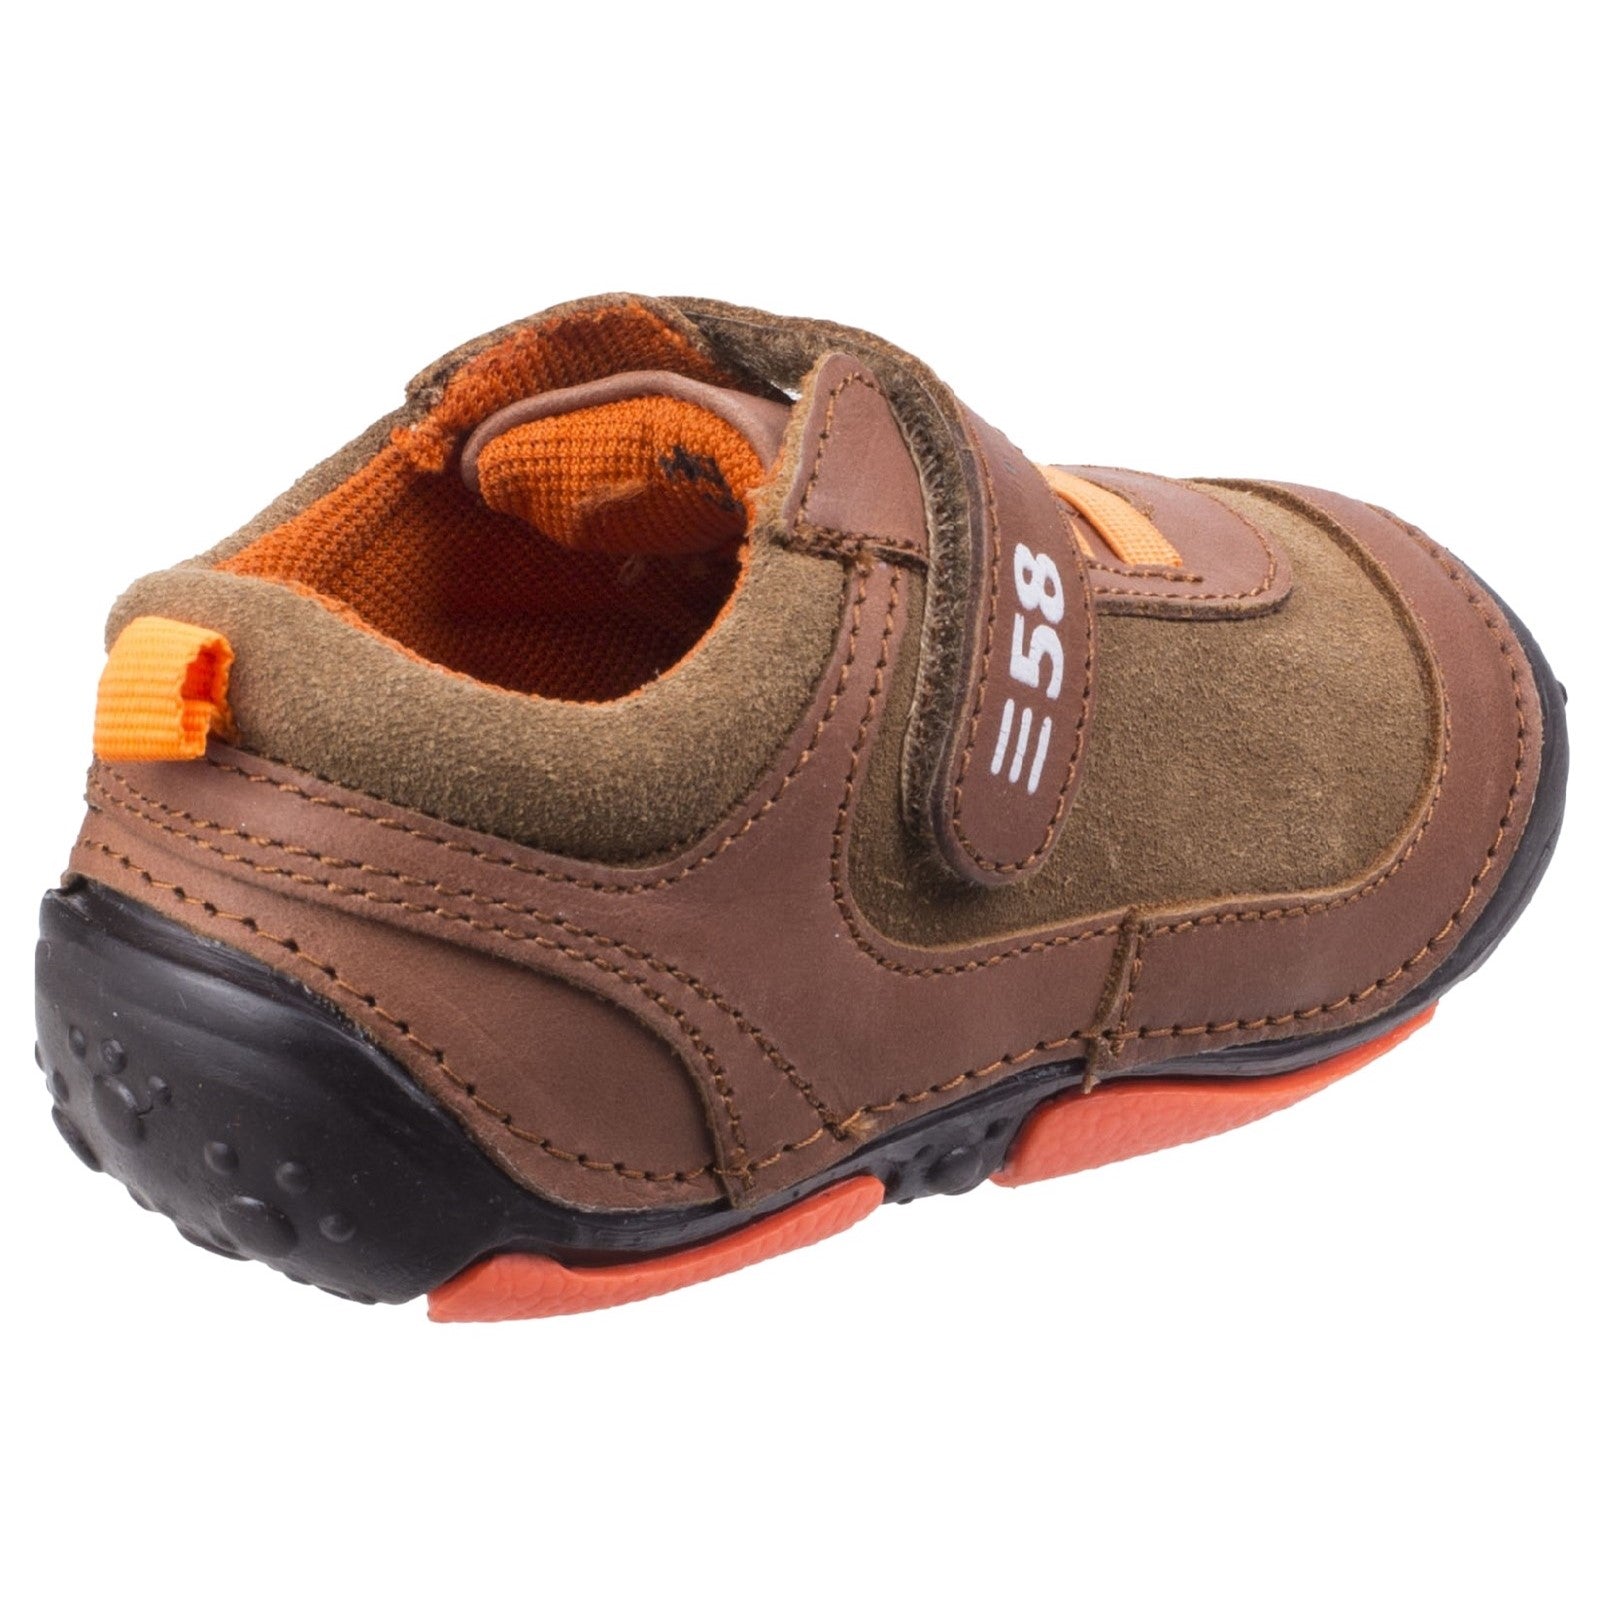 Hush Puppies Infant Boys Harry Touch Fastening Trainers - Brown